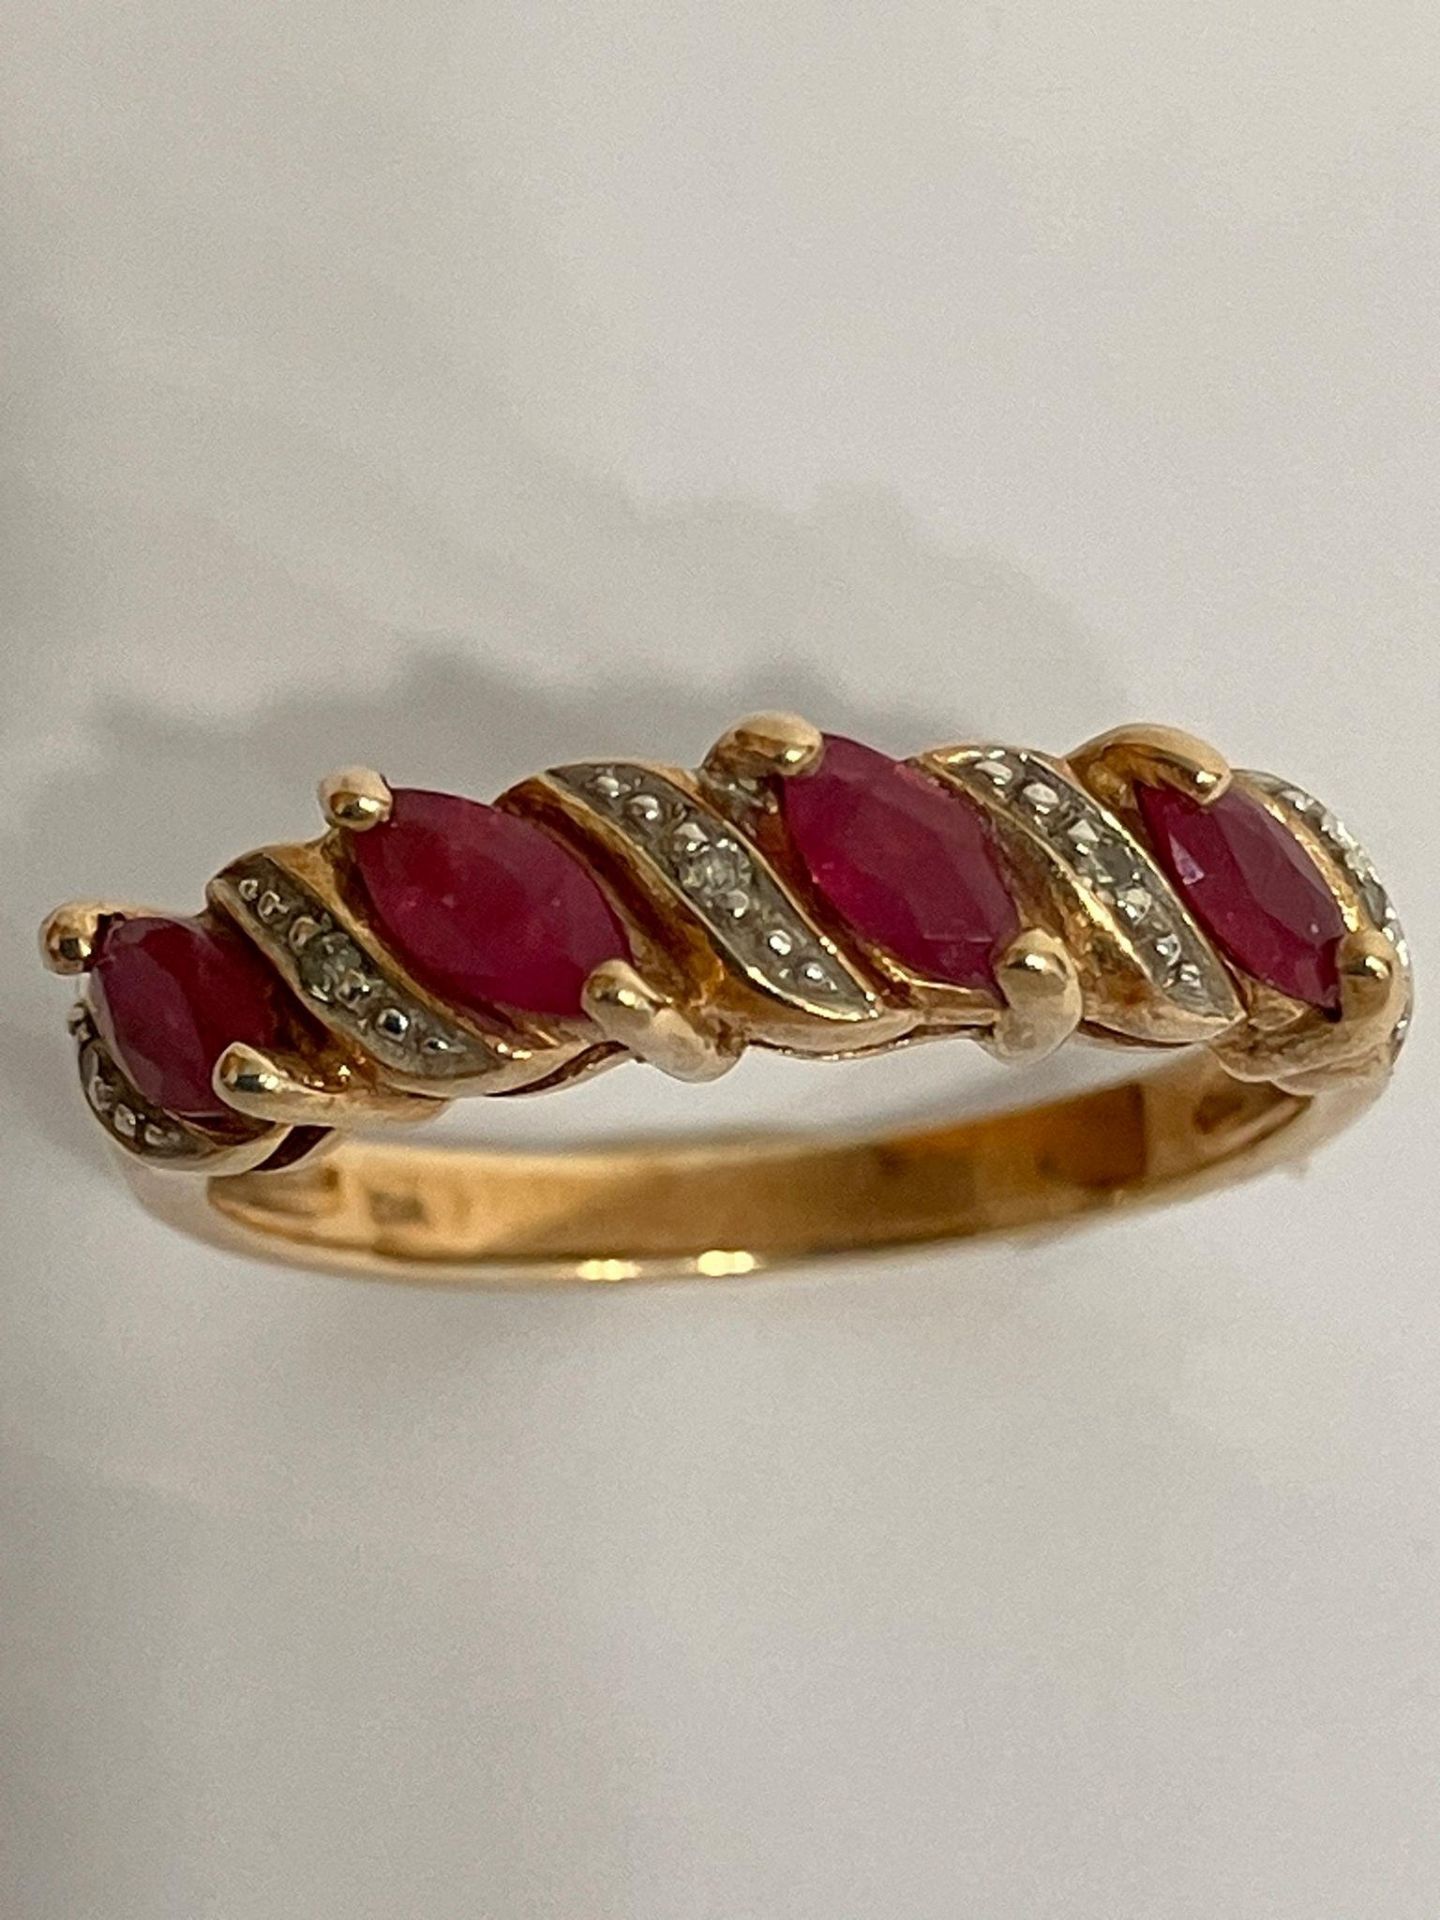 Classic 9 carat GOLD RUBY and DIAMOND RING. having Rubies and Diamonds sweep mounted. Full UK - Image 2 of 3